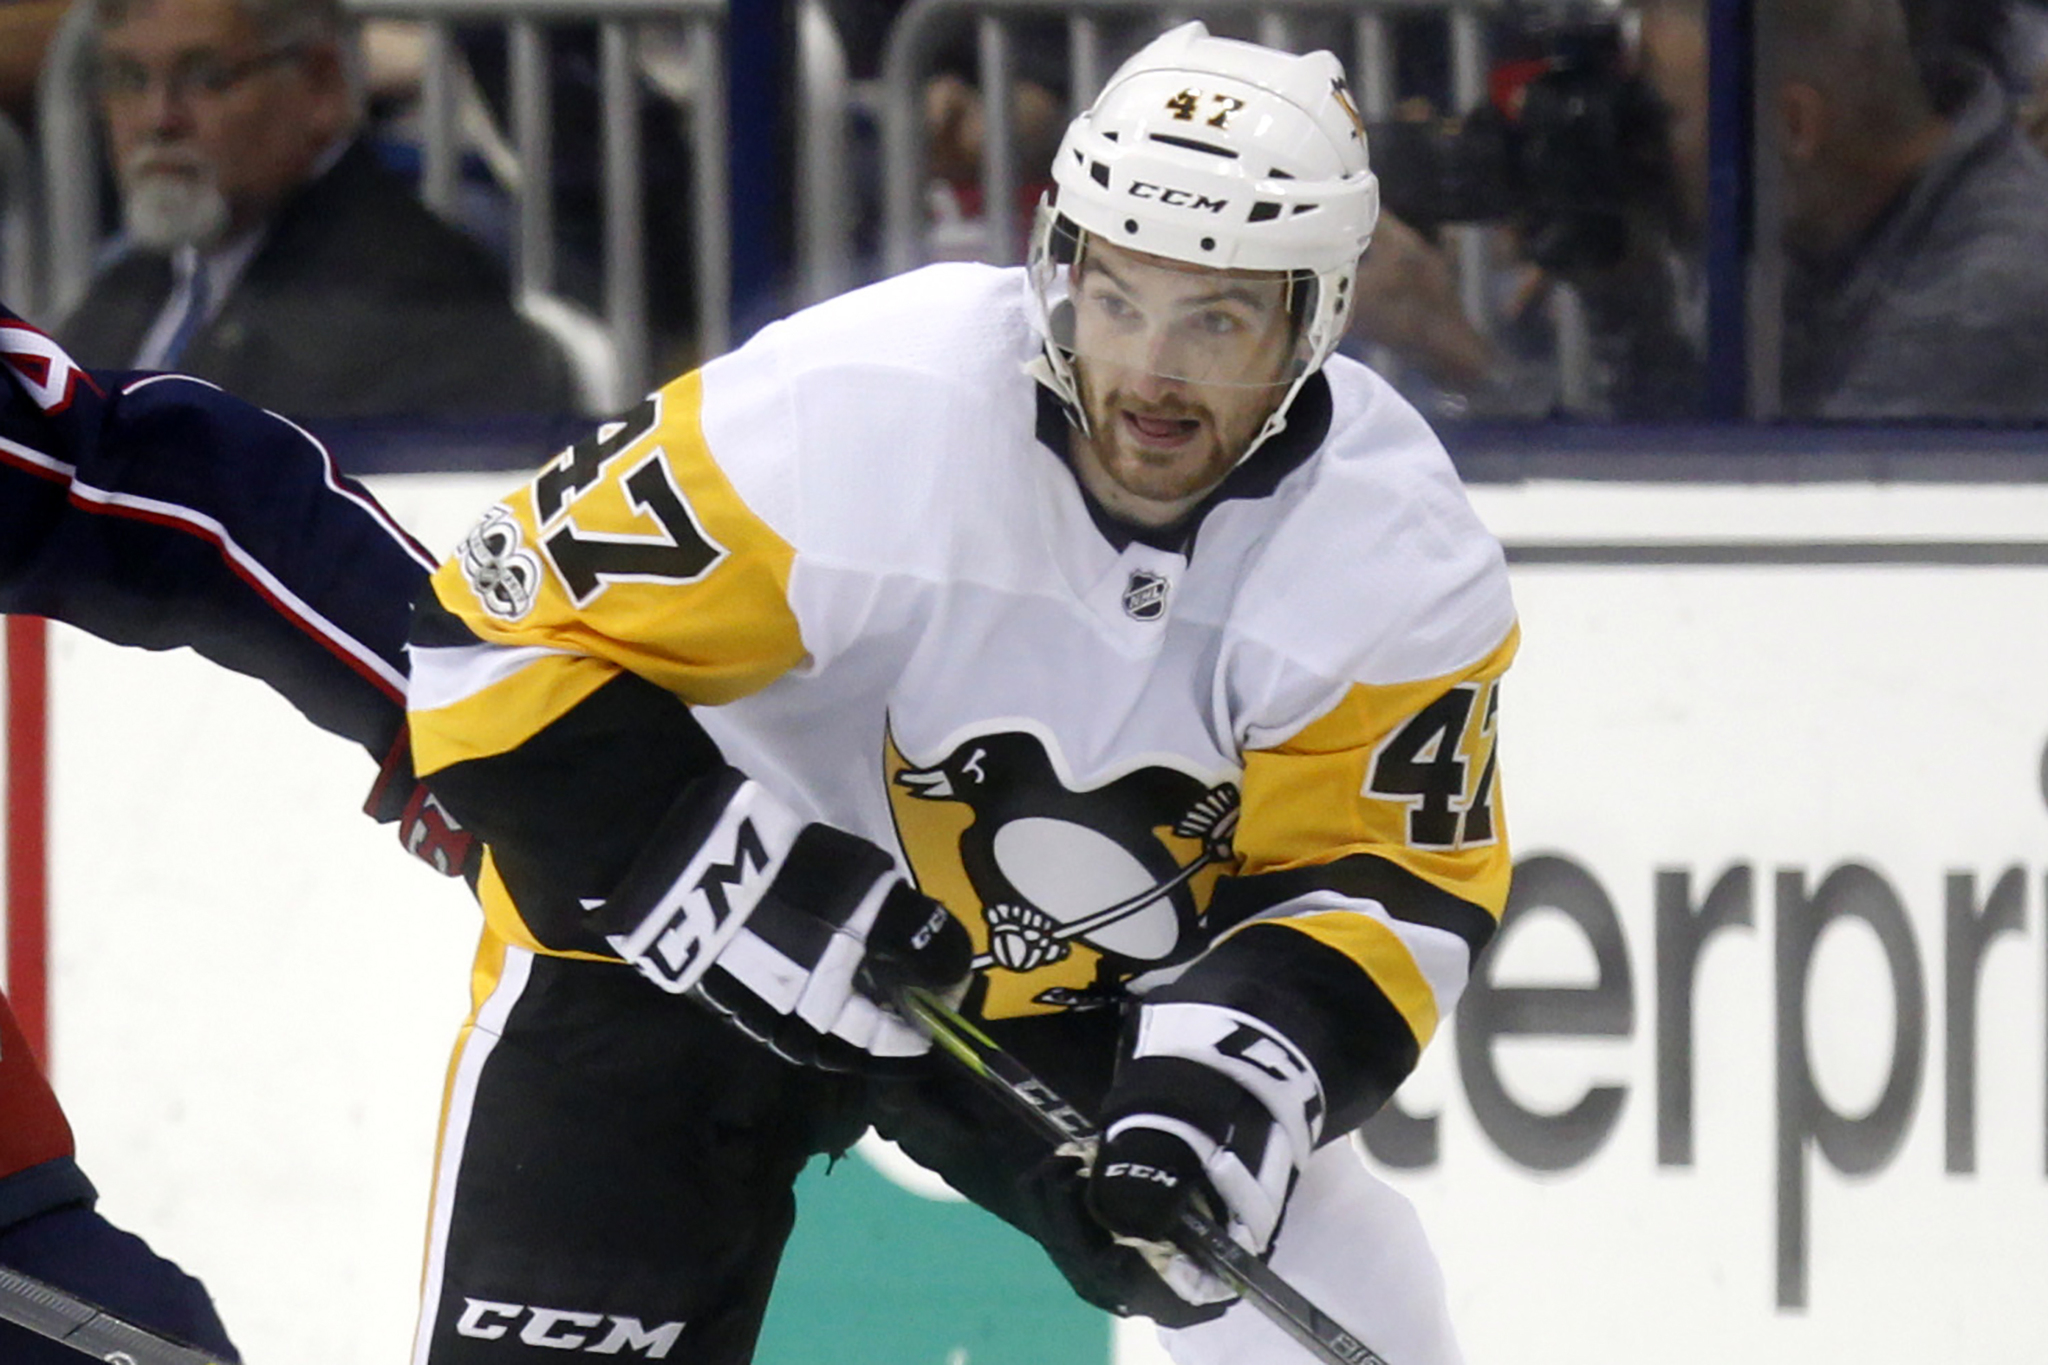 Pittsburgh Penguins forward Adam Johnson in action during an NHL hockey game in Columbus